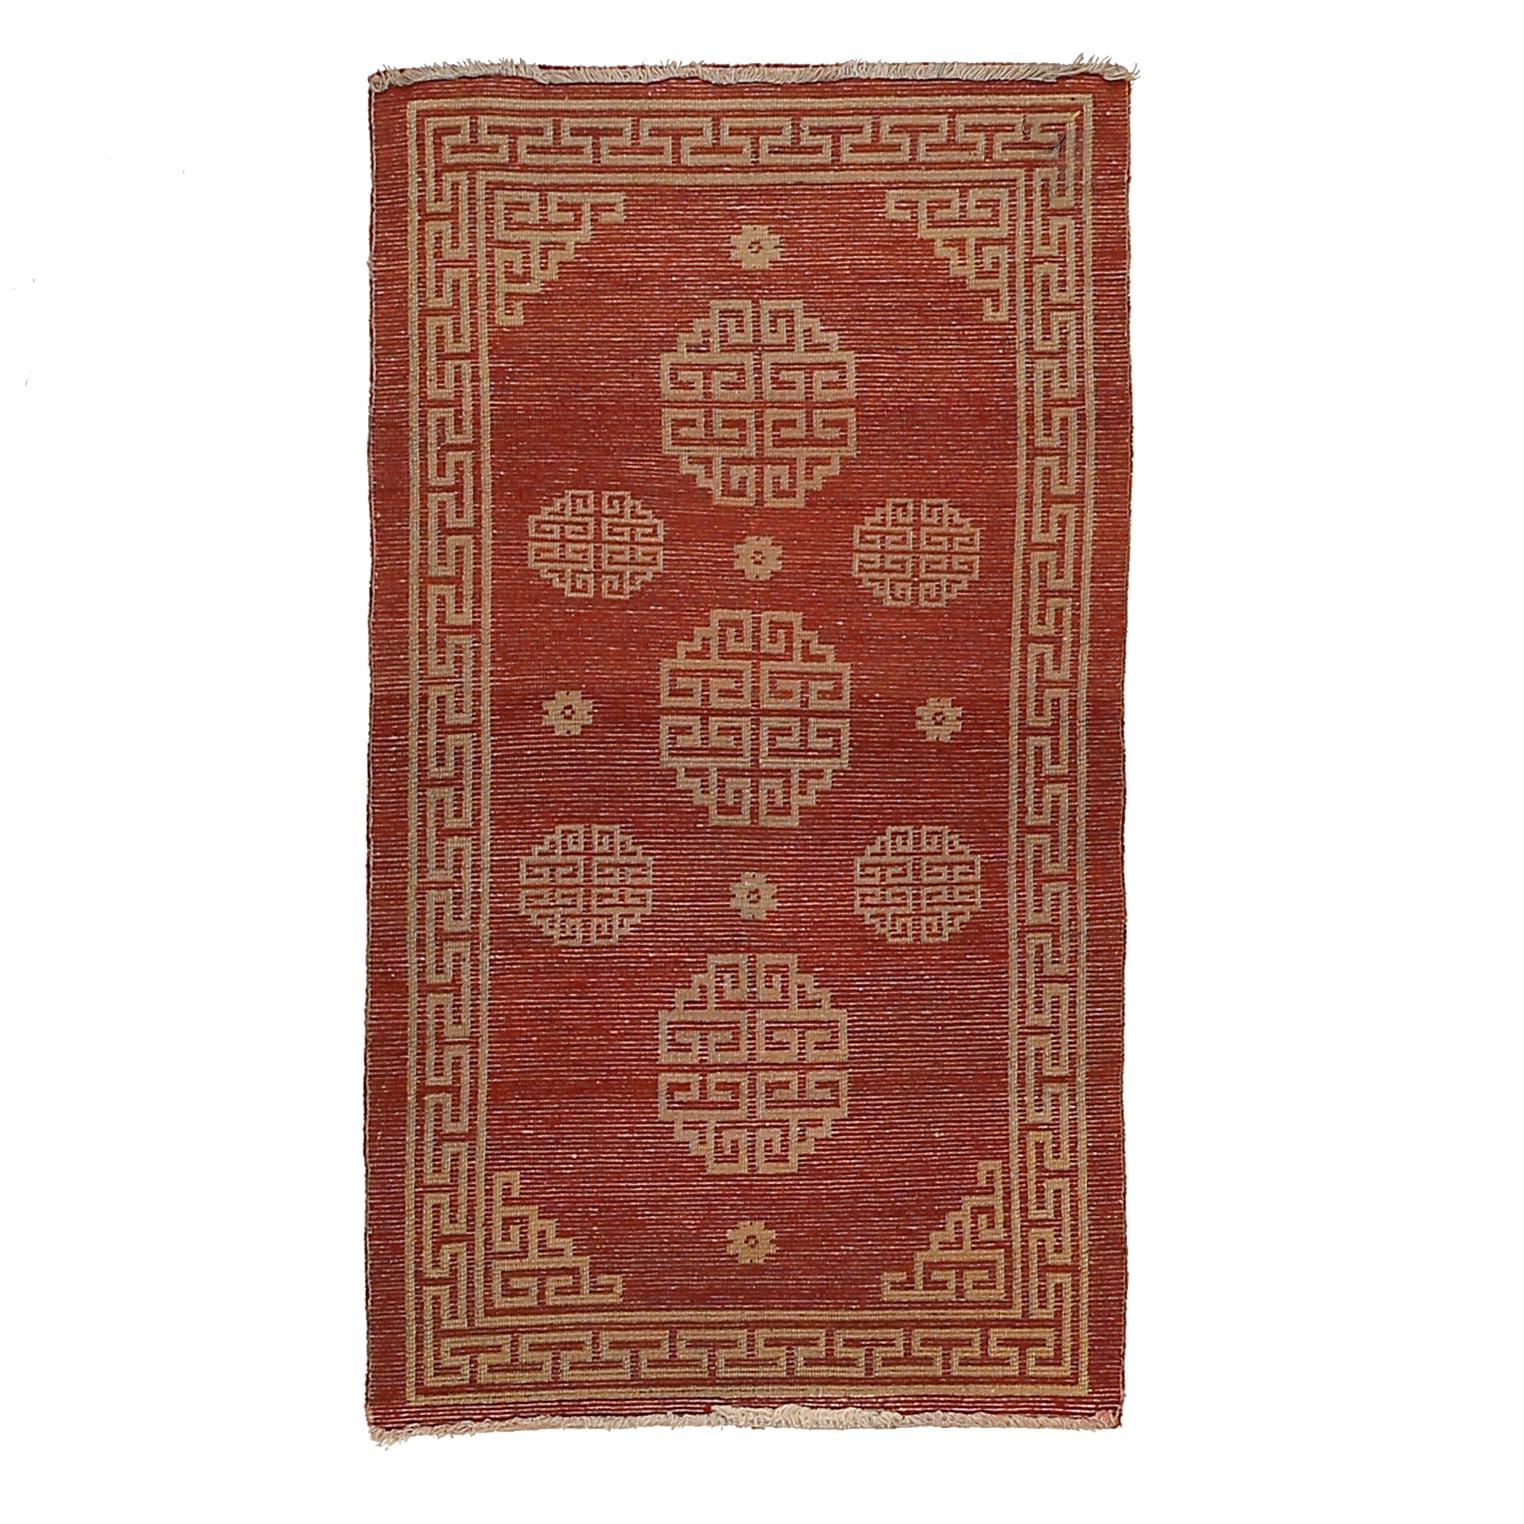 Here a series of golden yellow octagonal motifs, obtained from the stylisation of the dragon element, are arranged in an orderly manner against a rare lacquer red background. Very finely knotted with extremely soft and glossy Tibetan highland wool.